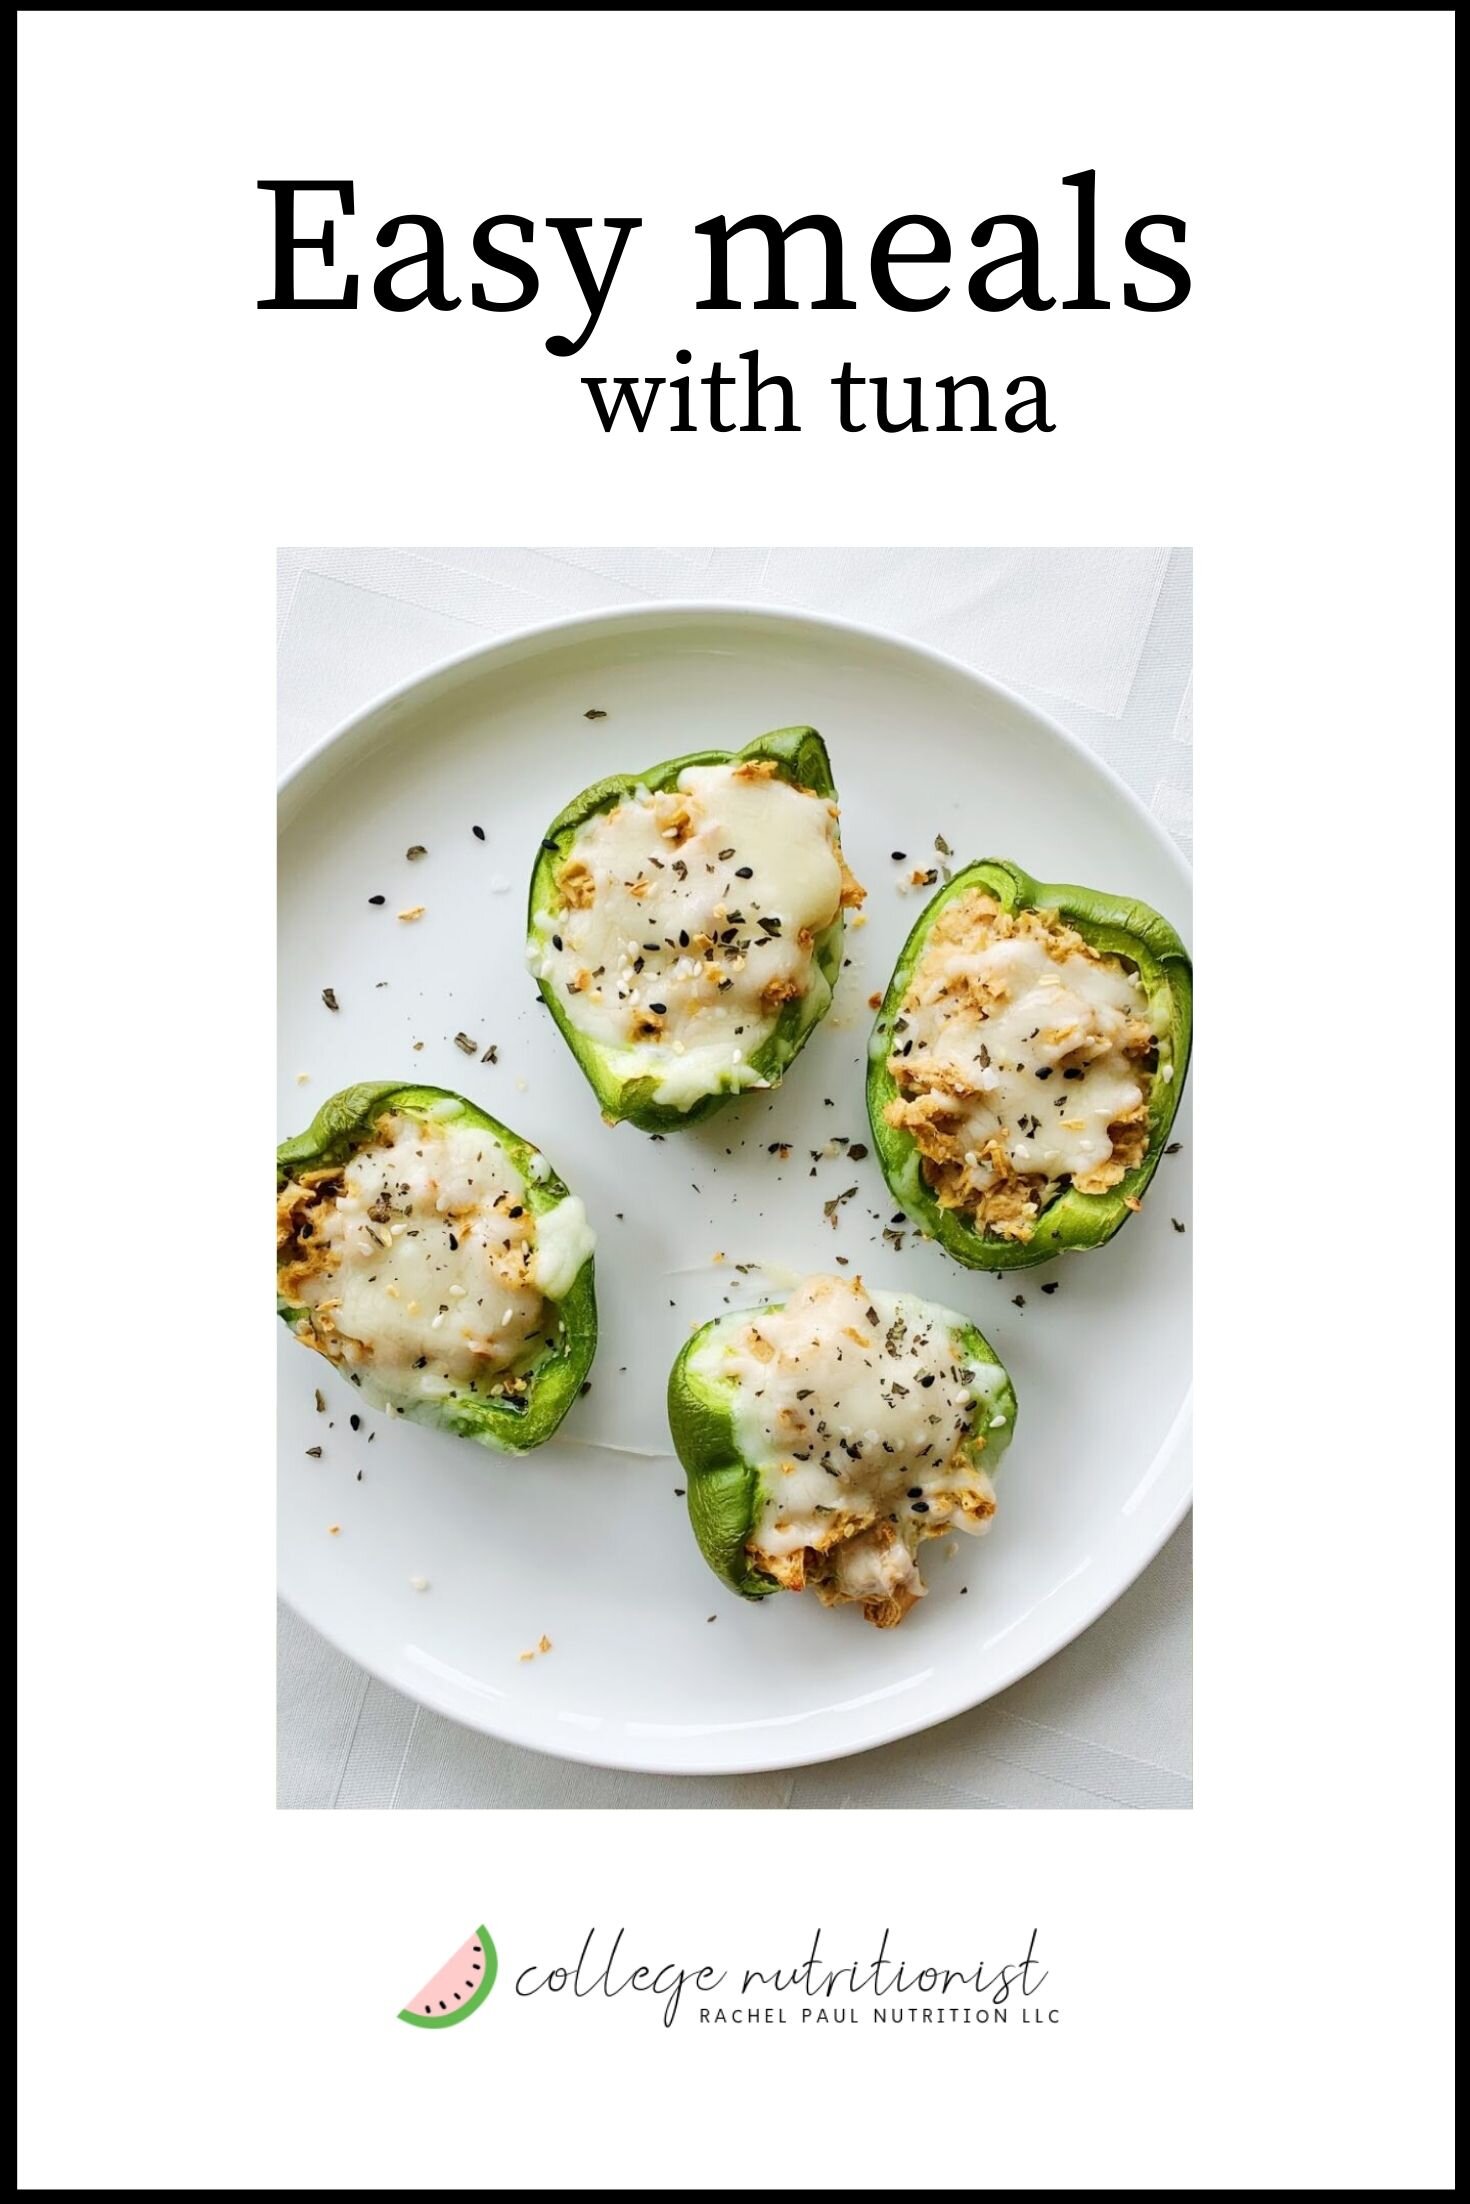 6 Easy Meals to Make with Tuna